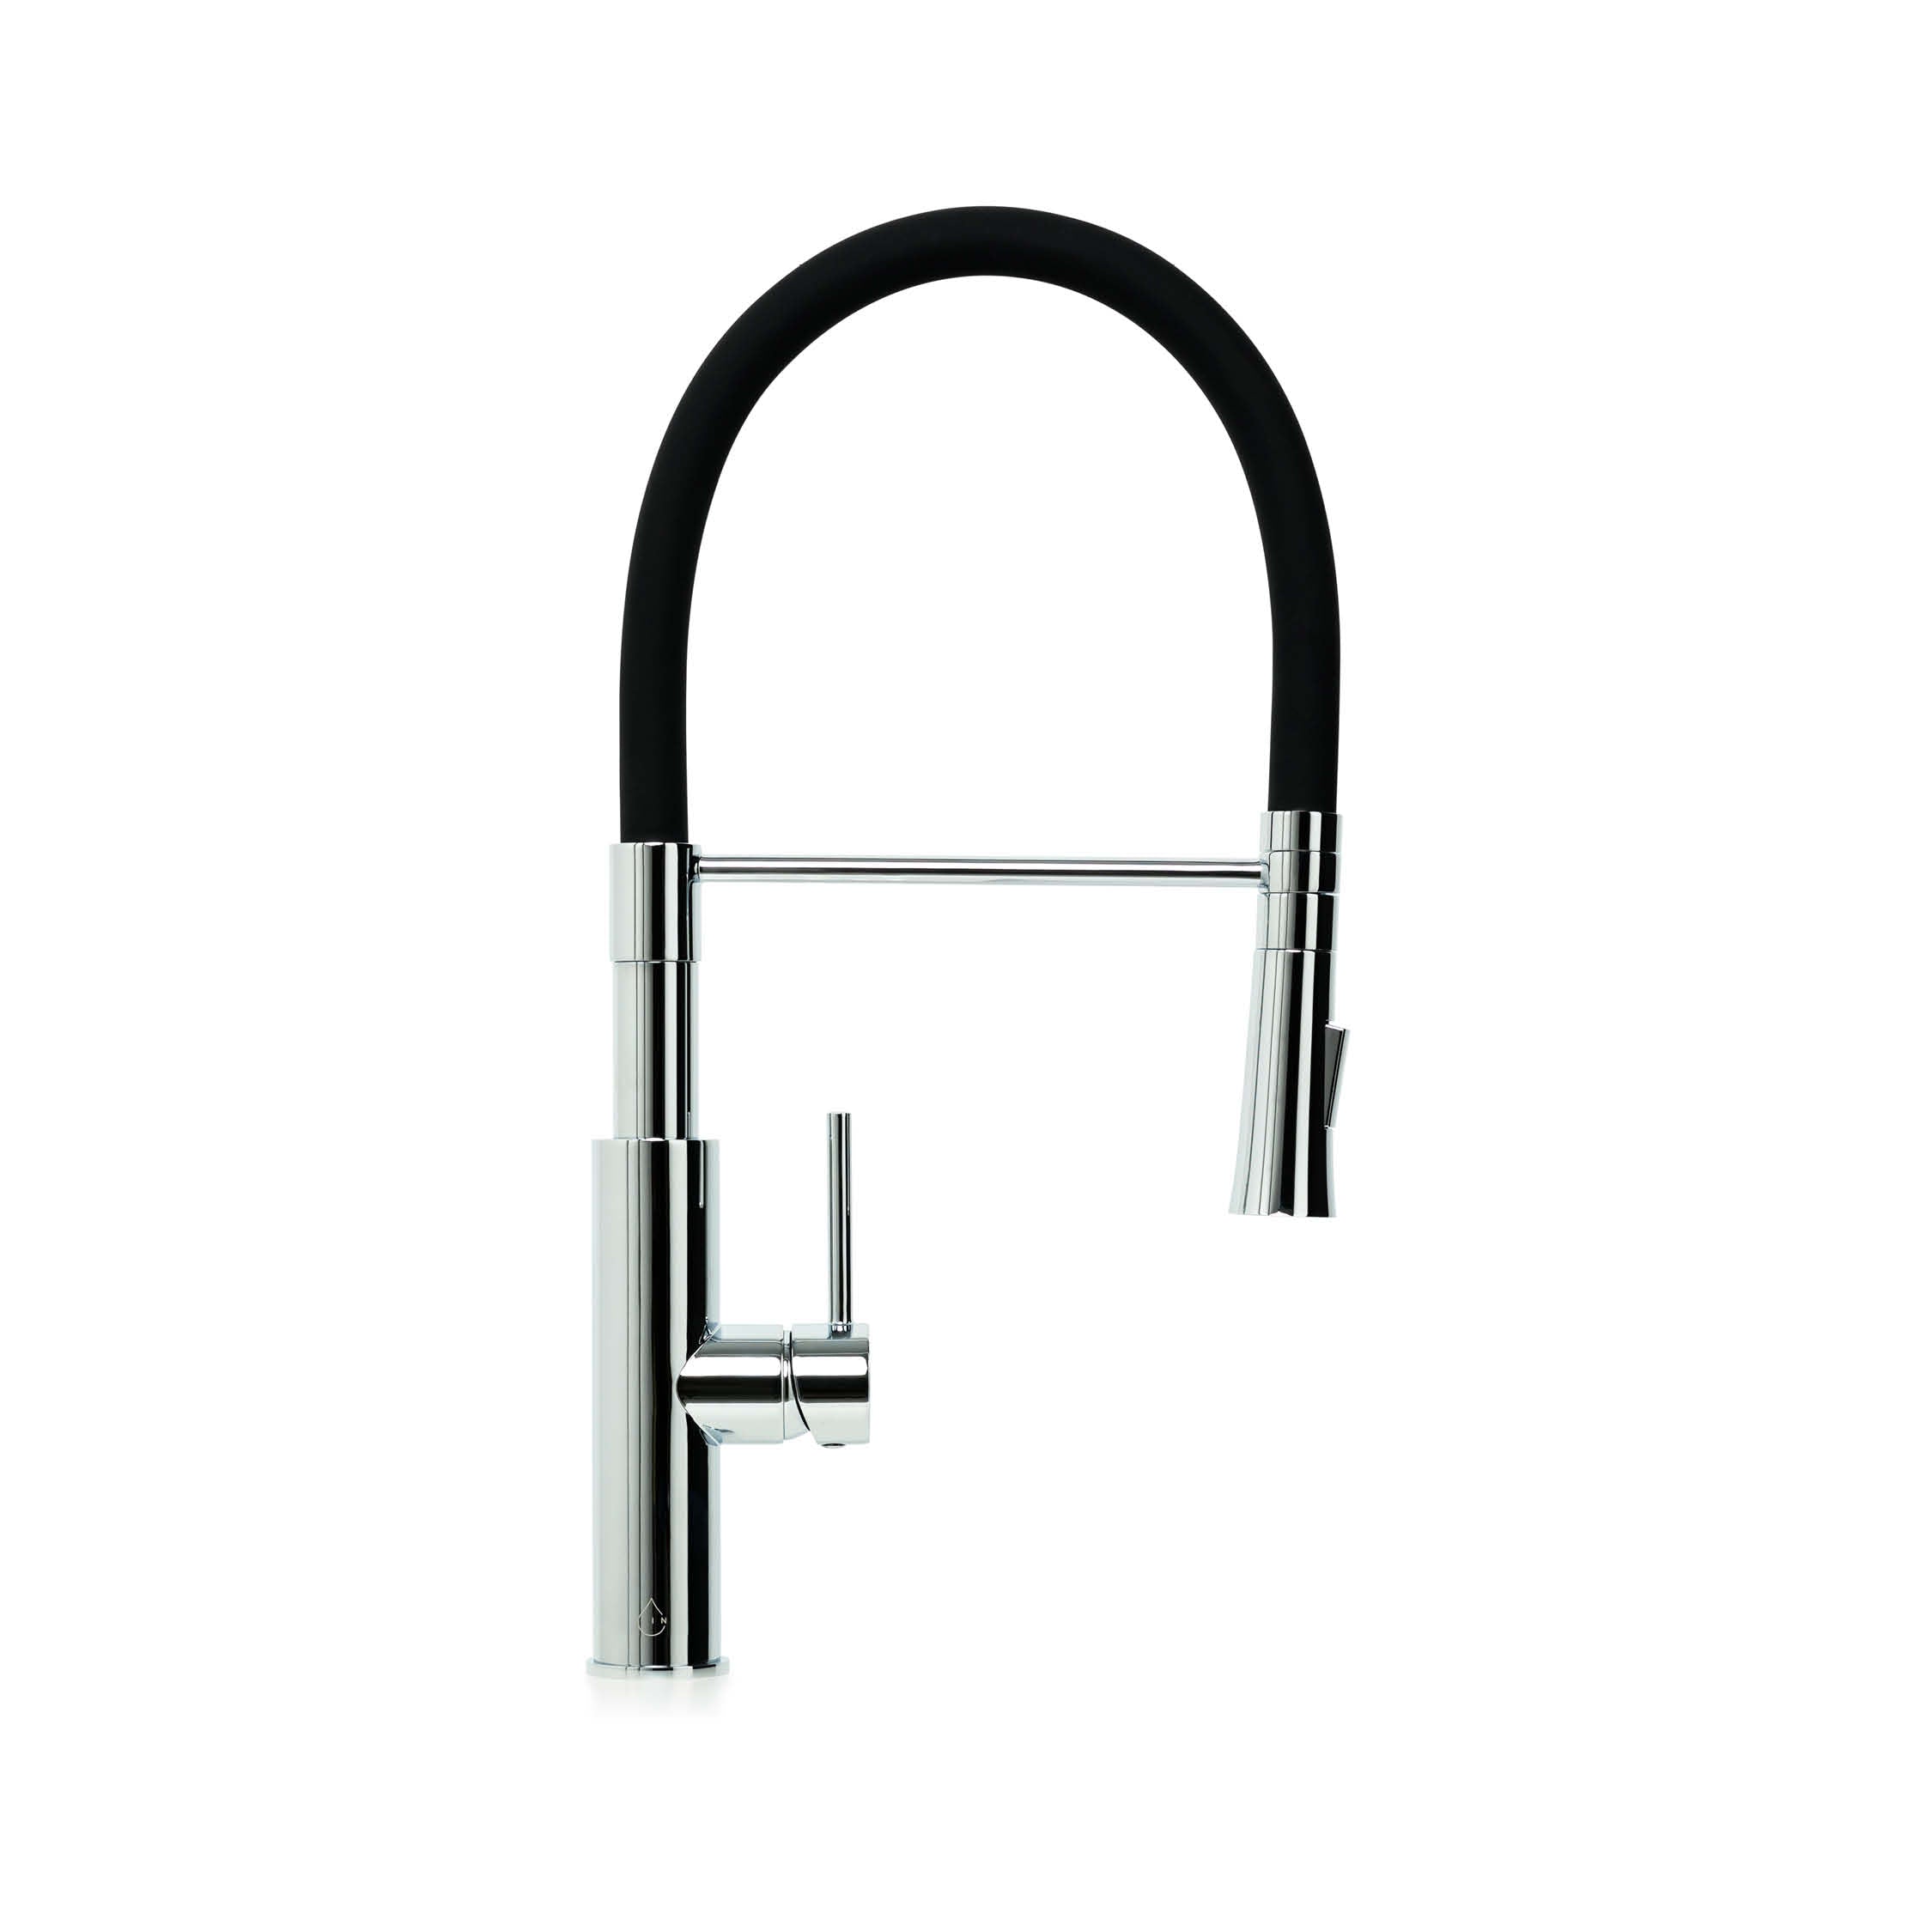 Ex-Display The Cove Kitchen Mixer in Black